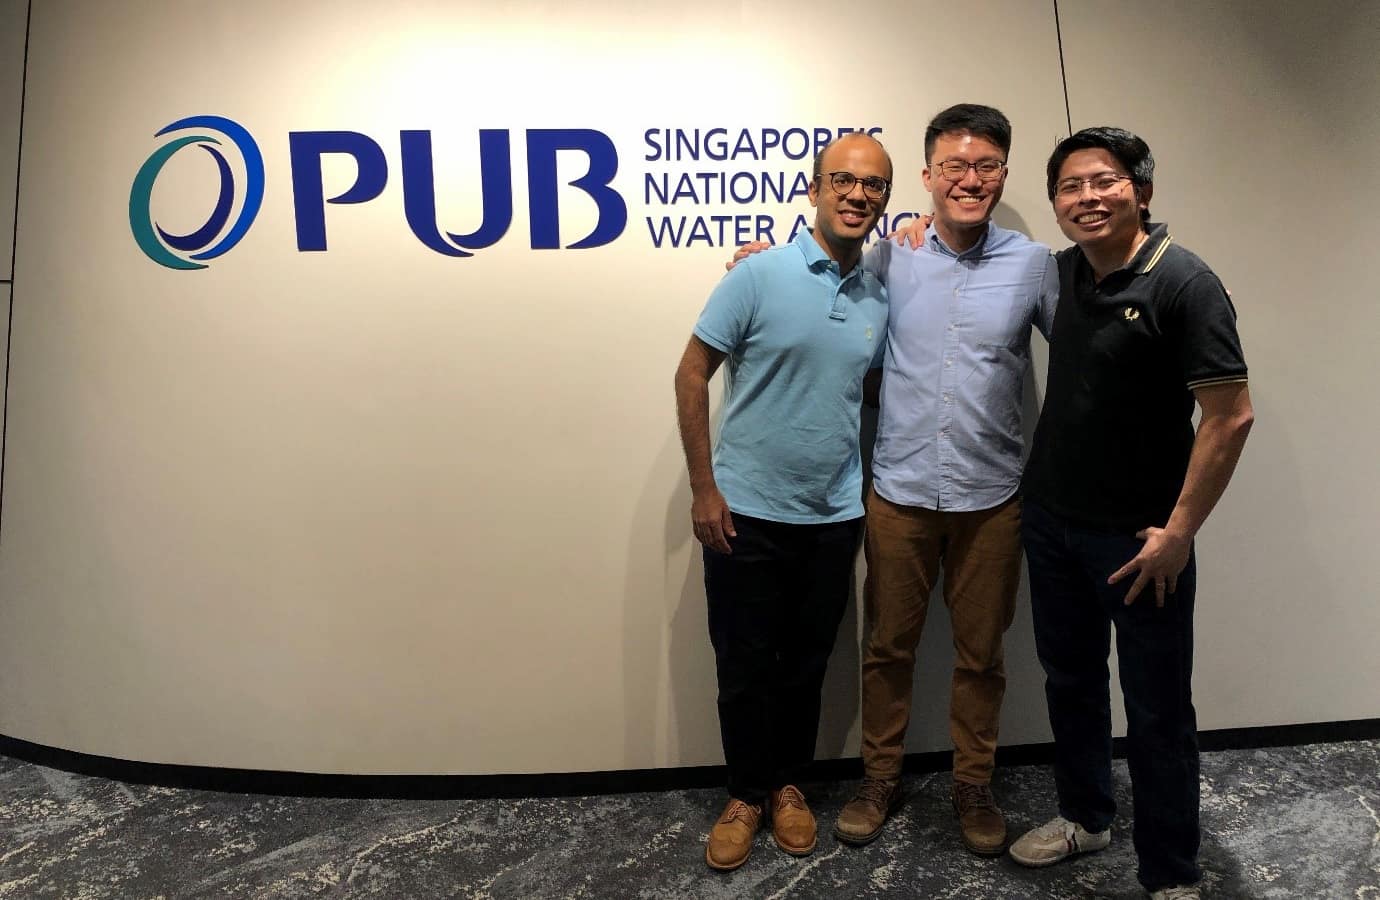 The team of PUB Engineers, from left to right: Hariharan s/o Ramasamy (Engineer, Joint Operations Department), Daniel John Tan (Engineer, Joint Operations Department), and Ashley Ng (Senior Planner, Policy and Planning Department).